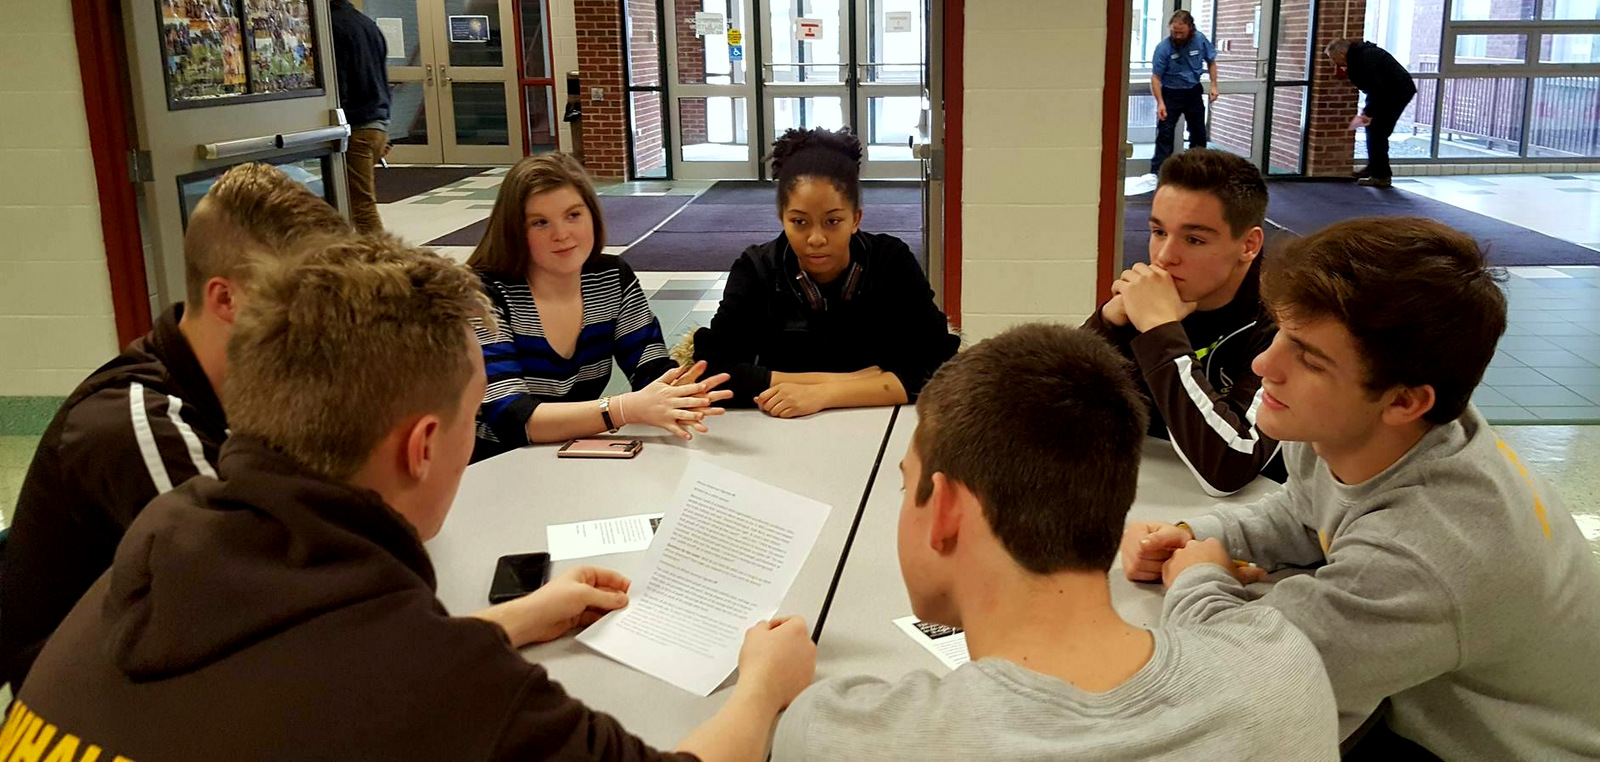 A University of Pittsburgh-Titusville student talks to local high school students during a Martin Luther King Jr. Day event, 2016. (Ashleigh English/YWCA Titusville)